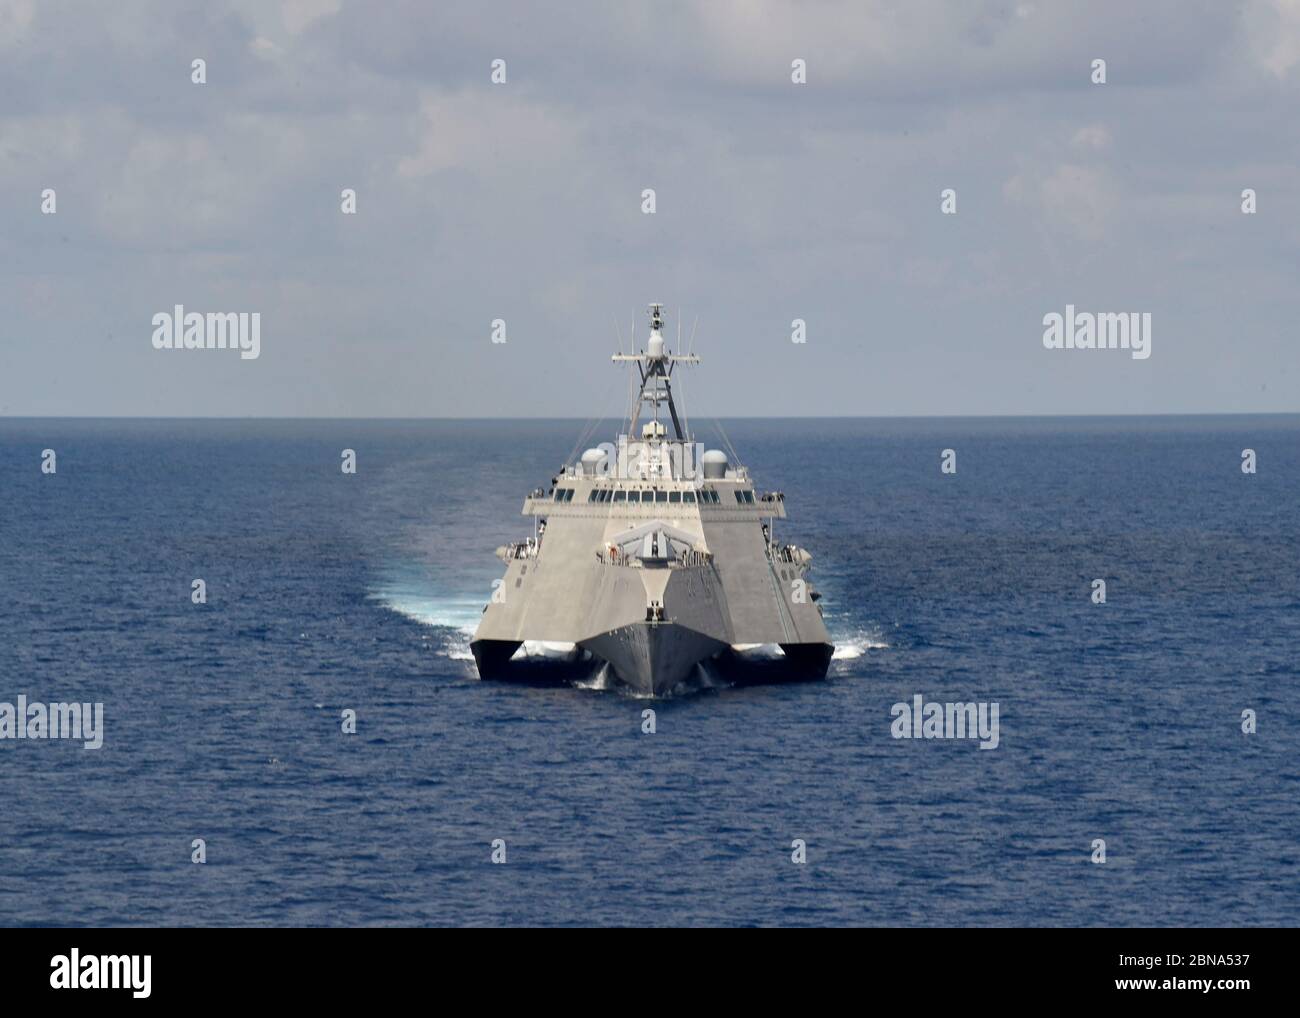 The U.S. Navy Independence-variant littoral combat ship USS Gabrielle Giffords patrols near the Panamanian flagged drill ship, West Capella which has been harassed by Chinese forces for drilling in disputed waters May 12, 2020 in the South China Sea. Stock Photo